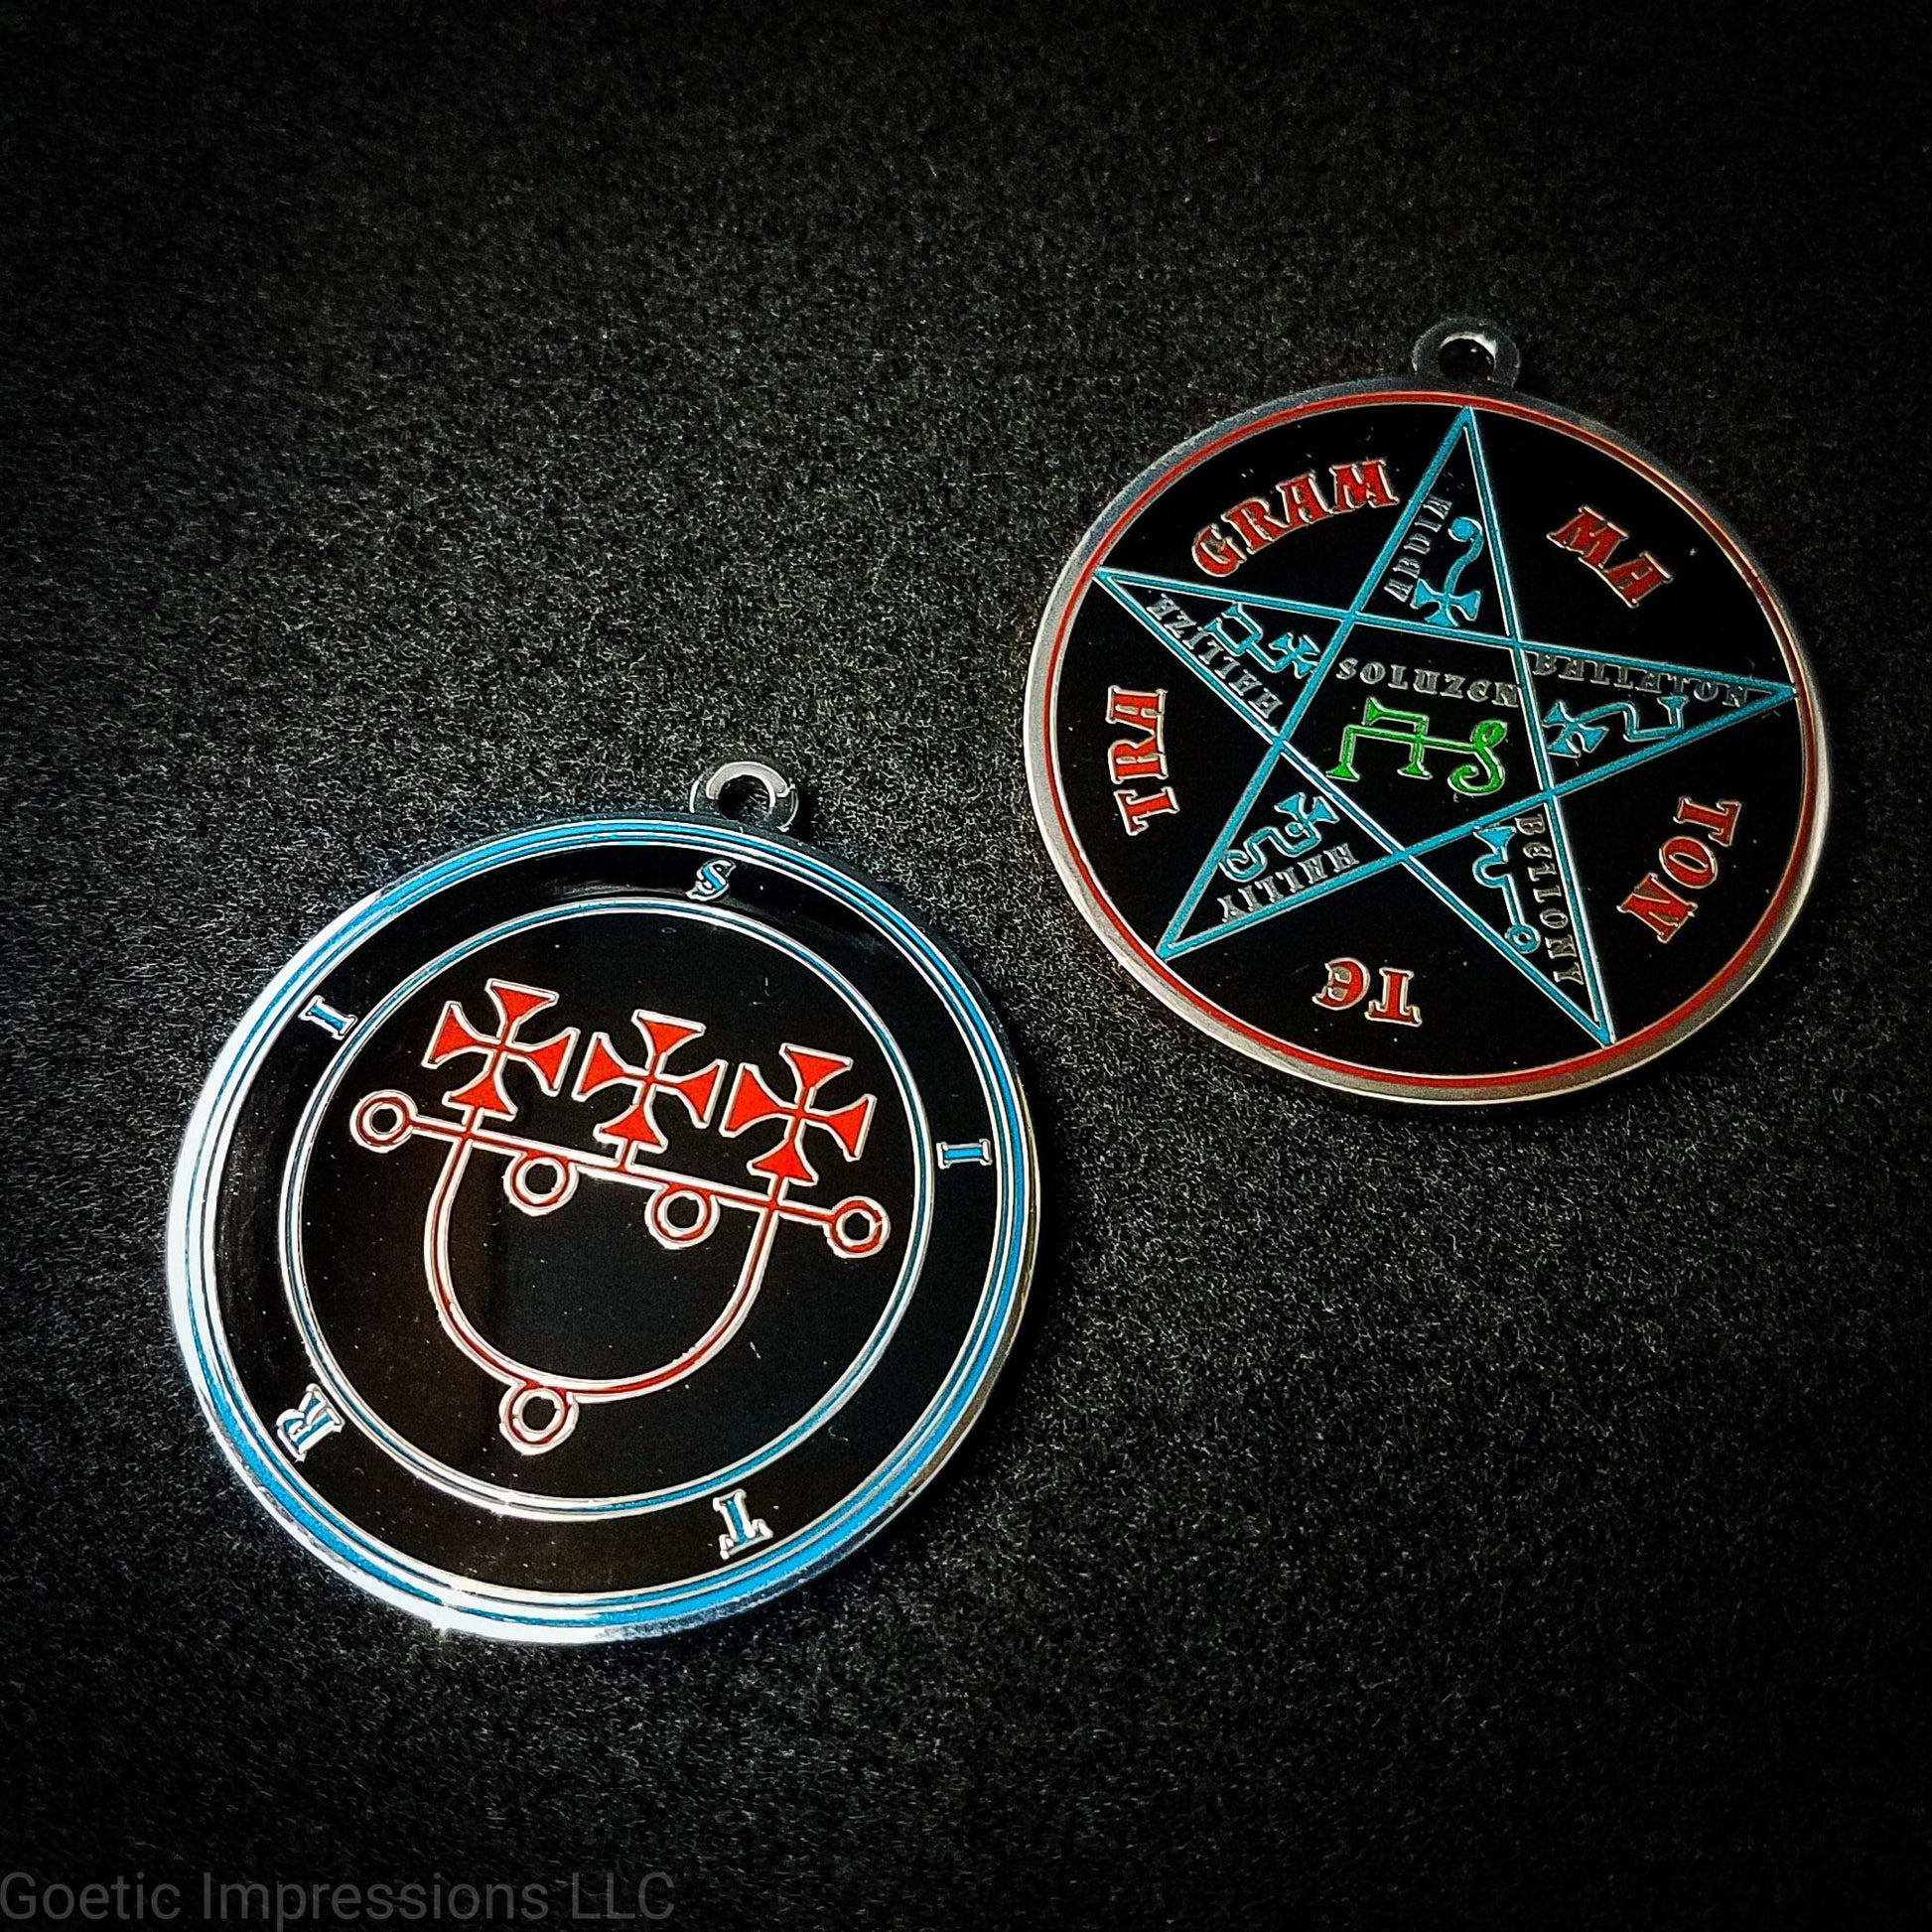 Two medallions showing the front and reverse side of the Goetic Spirit Sitri. The circles and text for Sitri is colored in blue with the sigil in red on a black background. The reverse side is the Pentacle of Solomon with TETRAGRAMMATON text in red, the star and sigils in blue and the center sigil in green. The seal is silver plated.